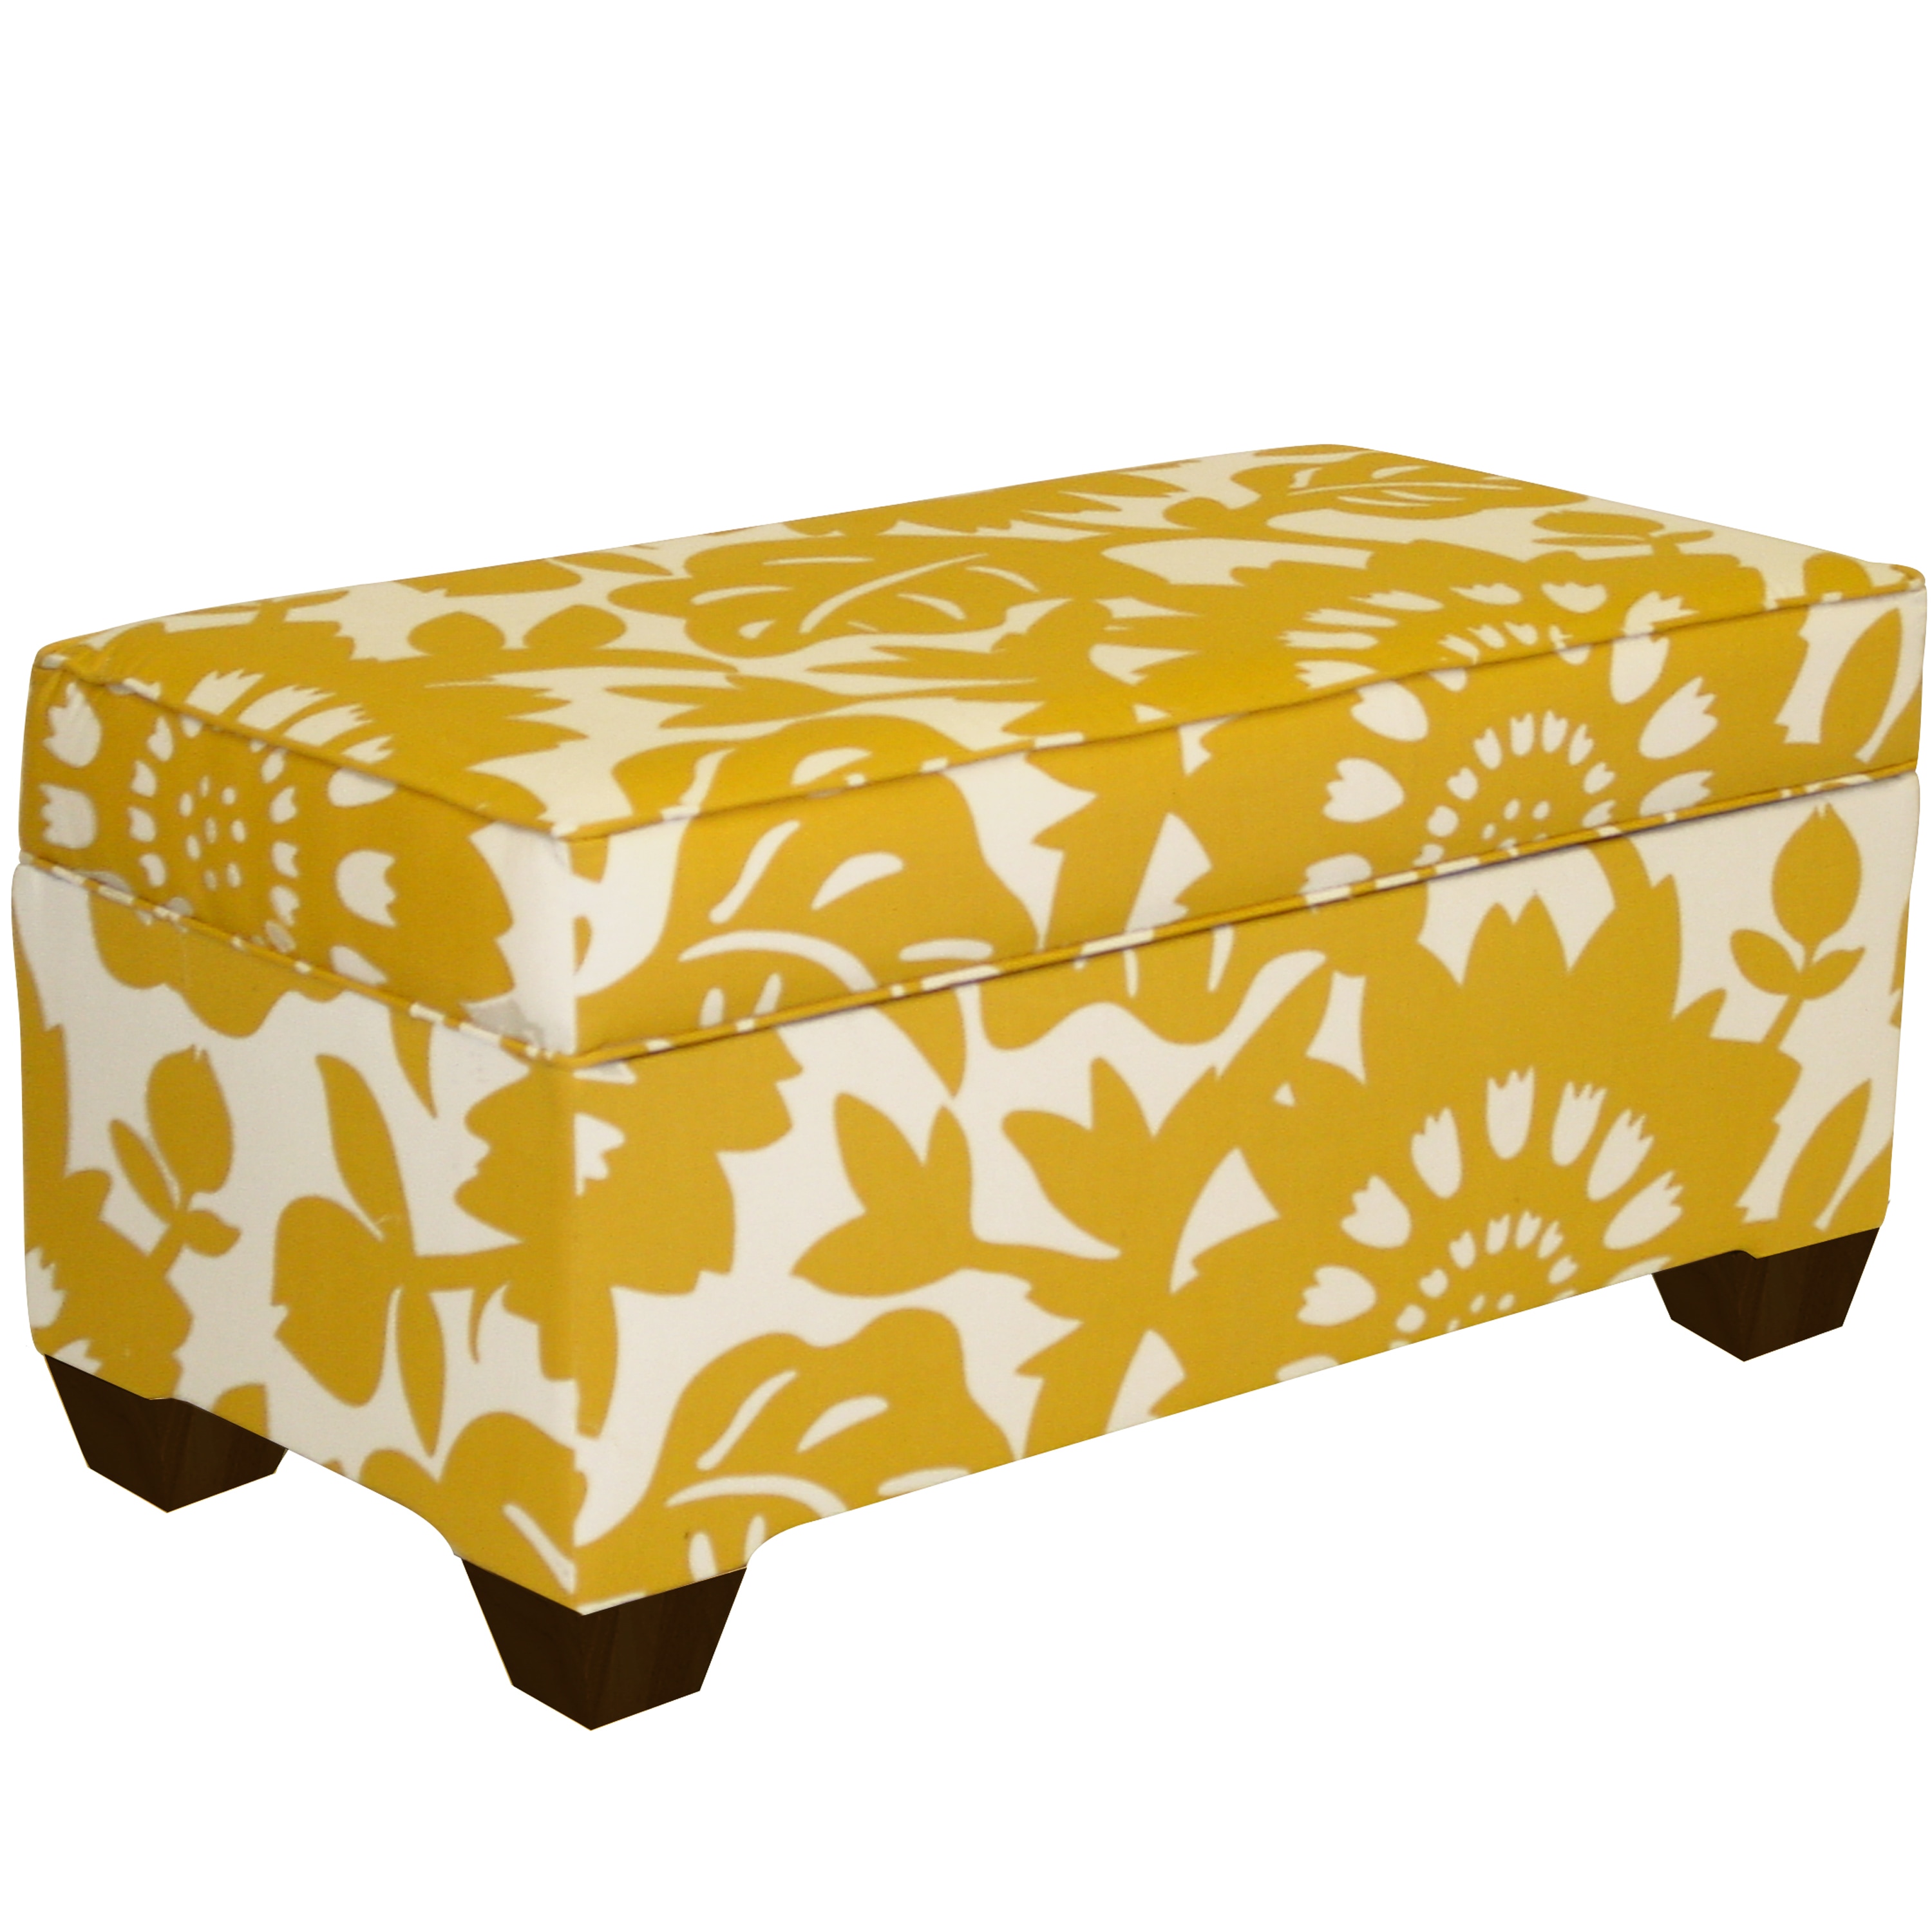 Skyline Furniture Storage Bench In Gerber Sungold Free Shipping